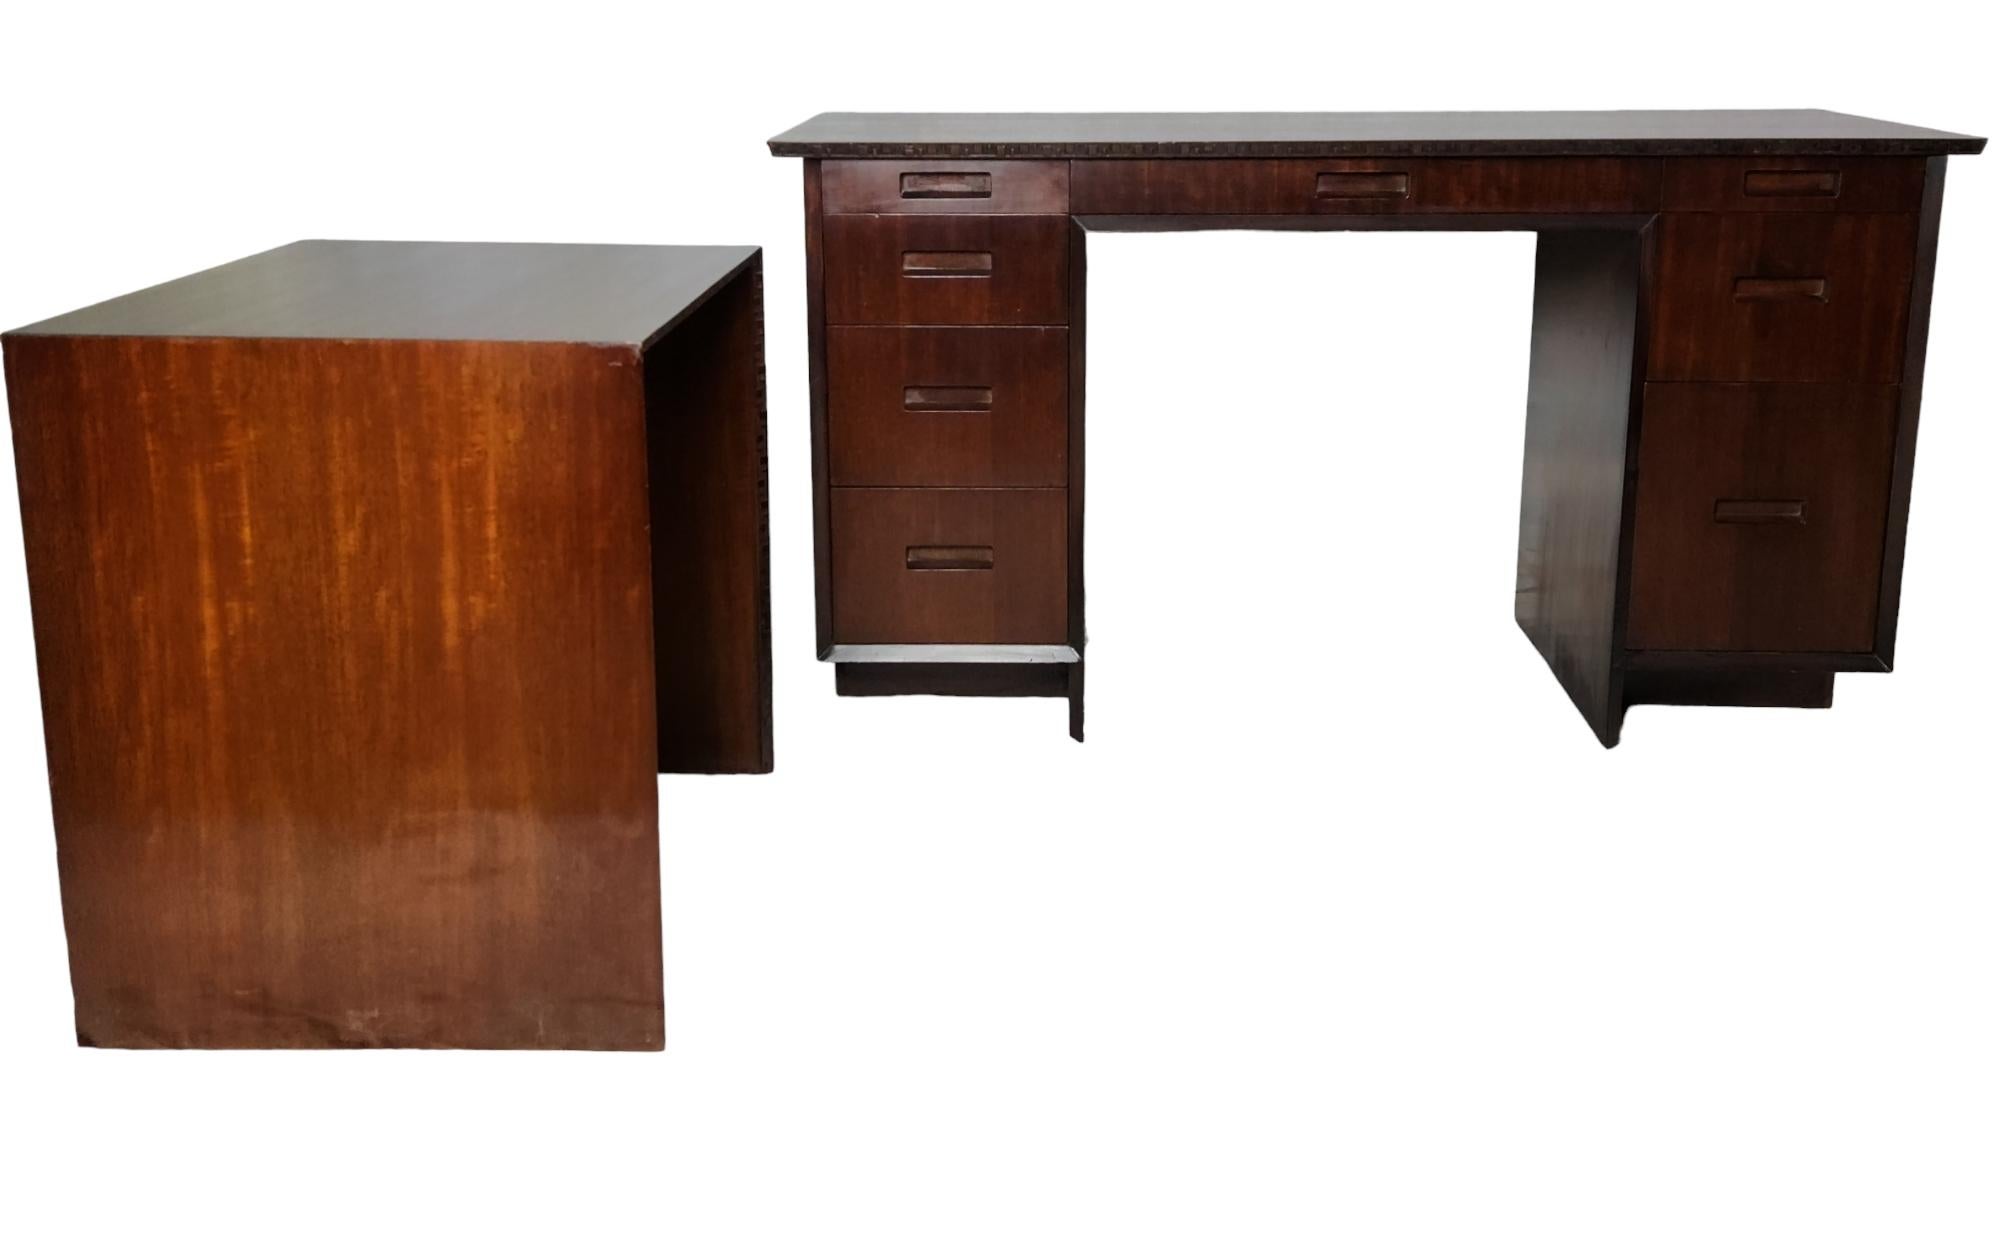 A professionally refinished classic nine drawer Honduran mahogany desk with a separate typewriter table designed by Frank Lloyd Wright for his Taliesin line of furniture manufactured by Heritage Henredon of Grand Rapids, Michigan in 1955.
This desk